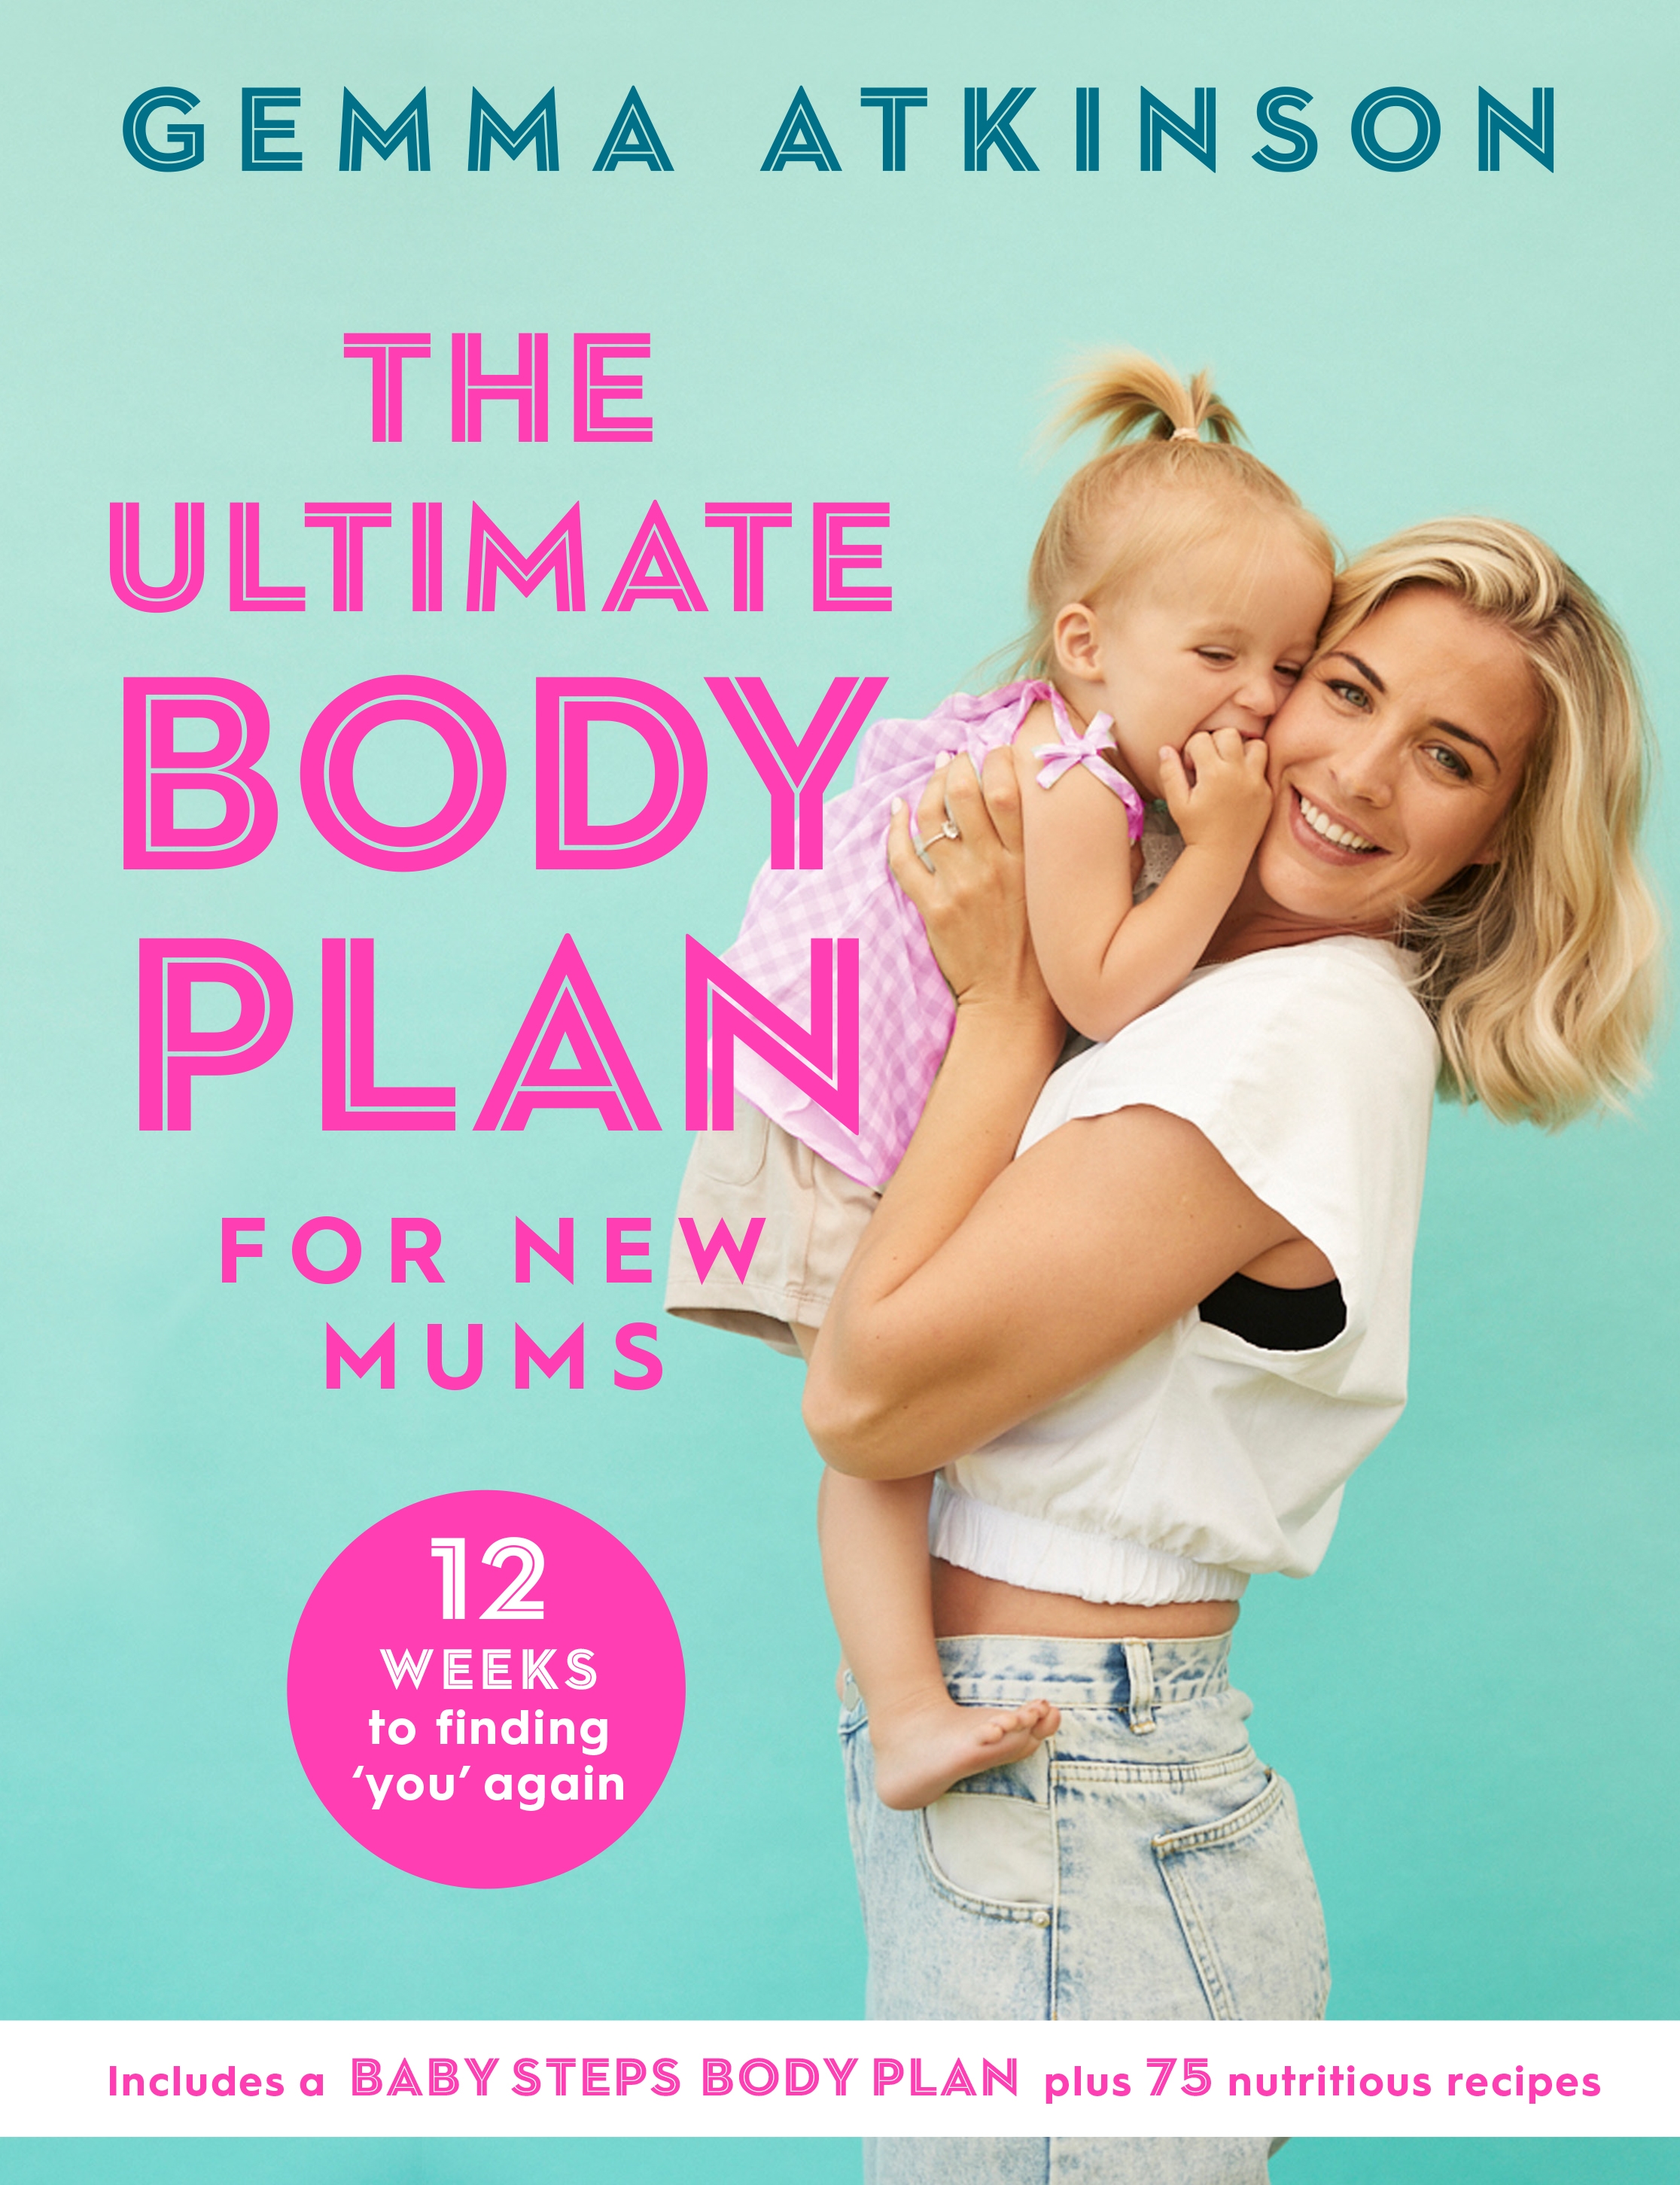 The Ultimate Body Plan for New Mums by Gemma Atkinson (Headline Home, £16.99)